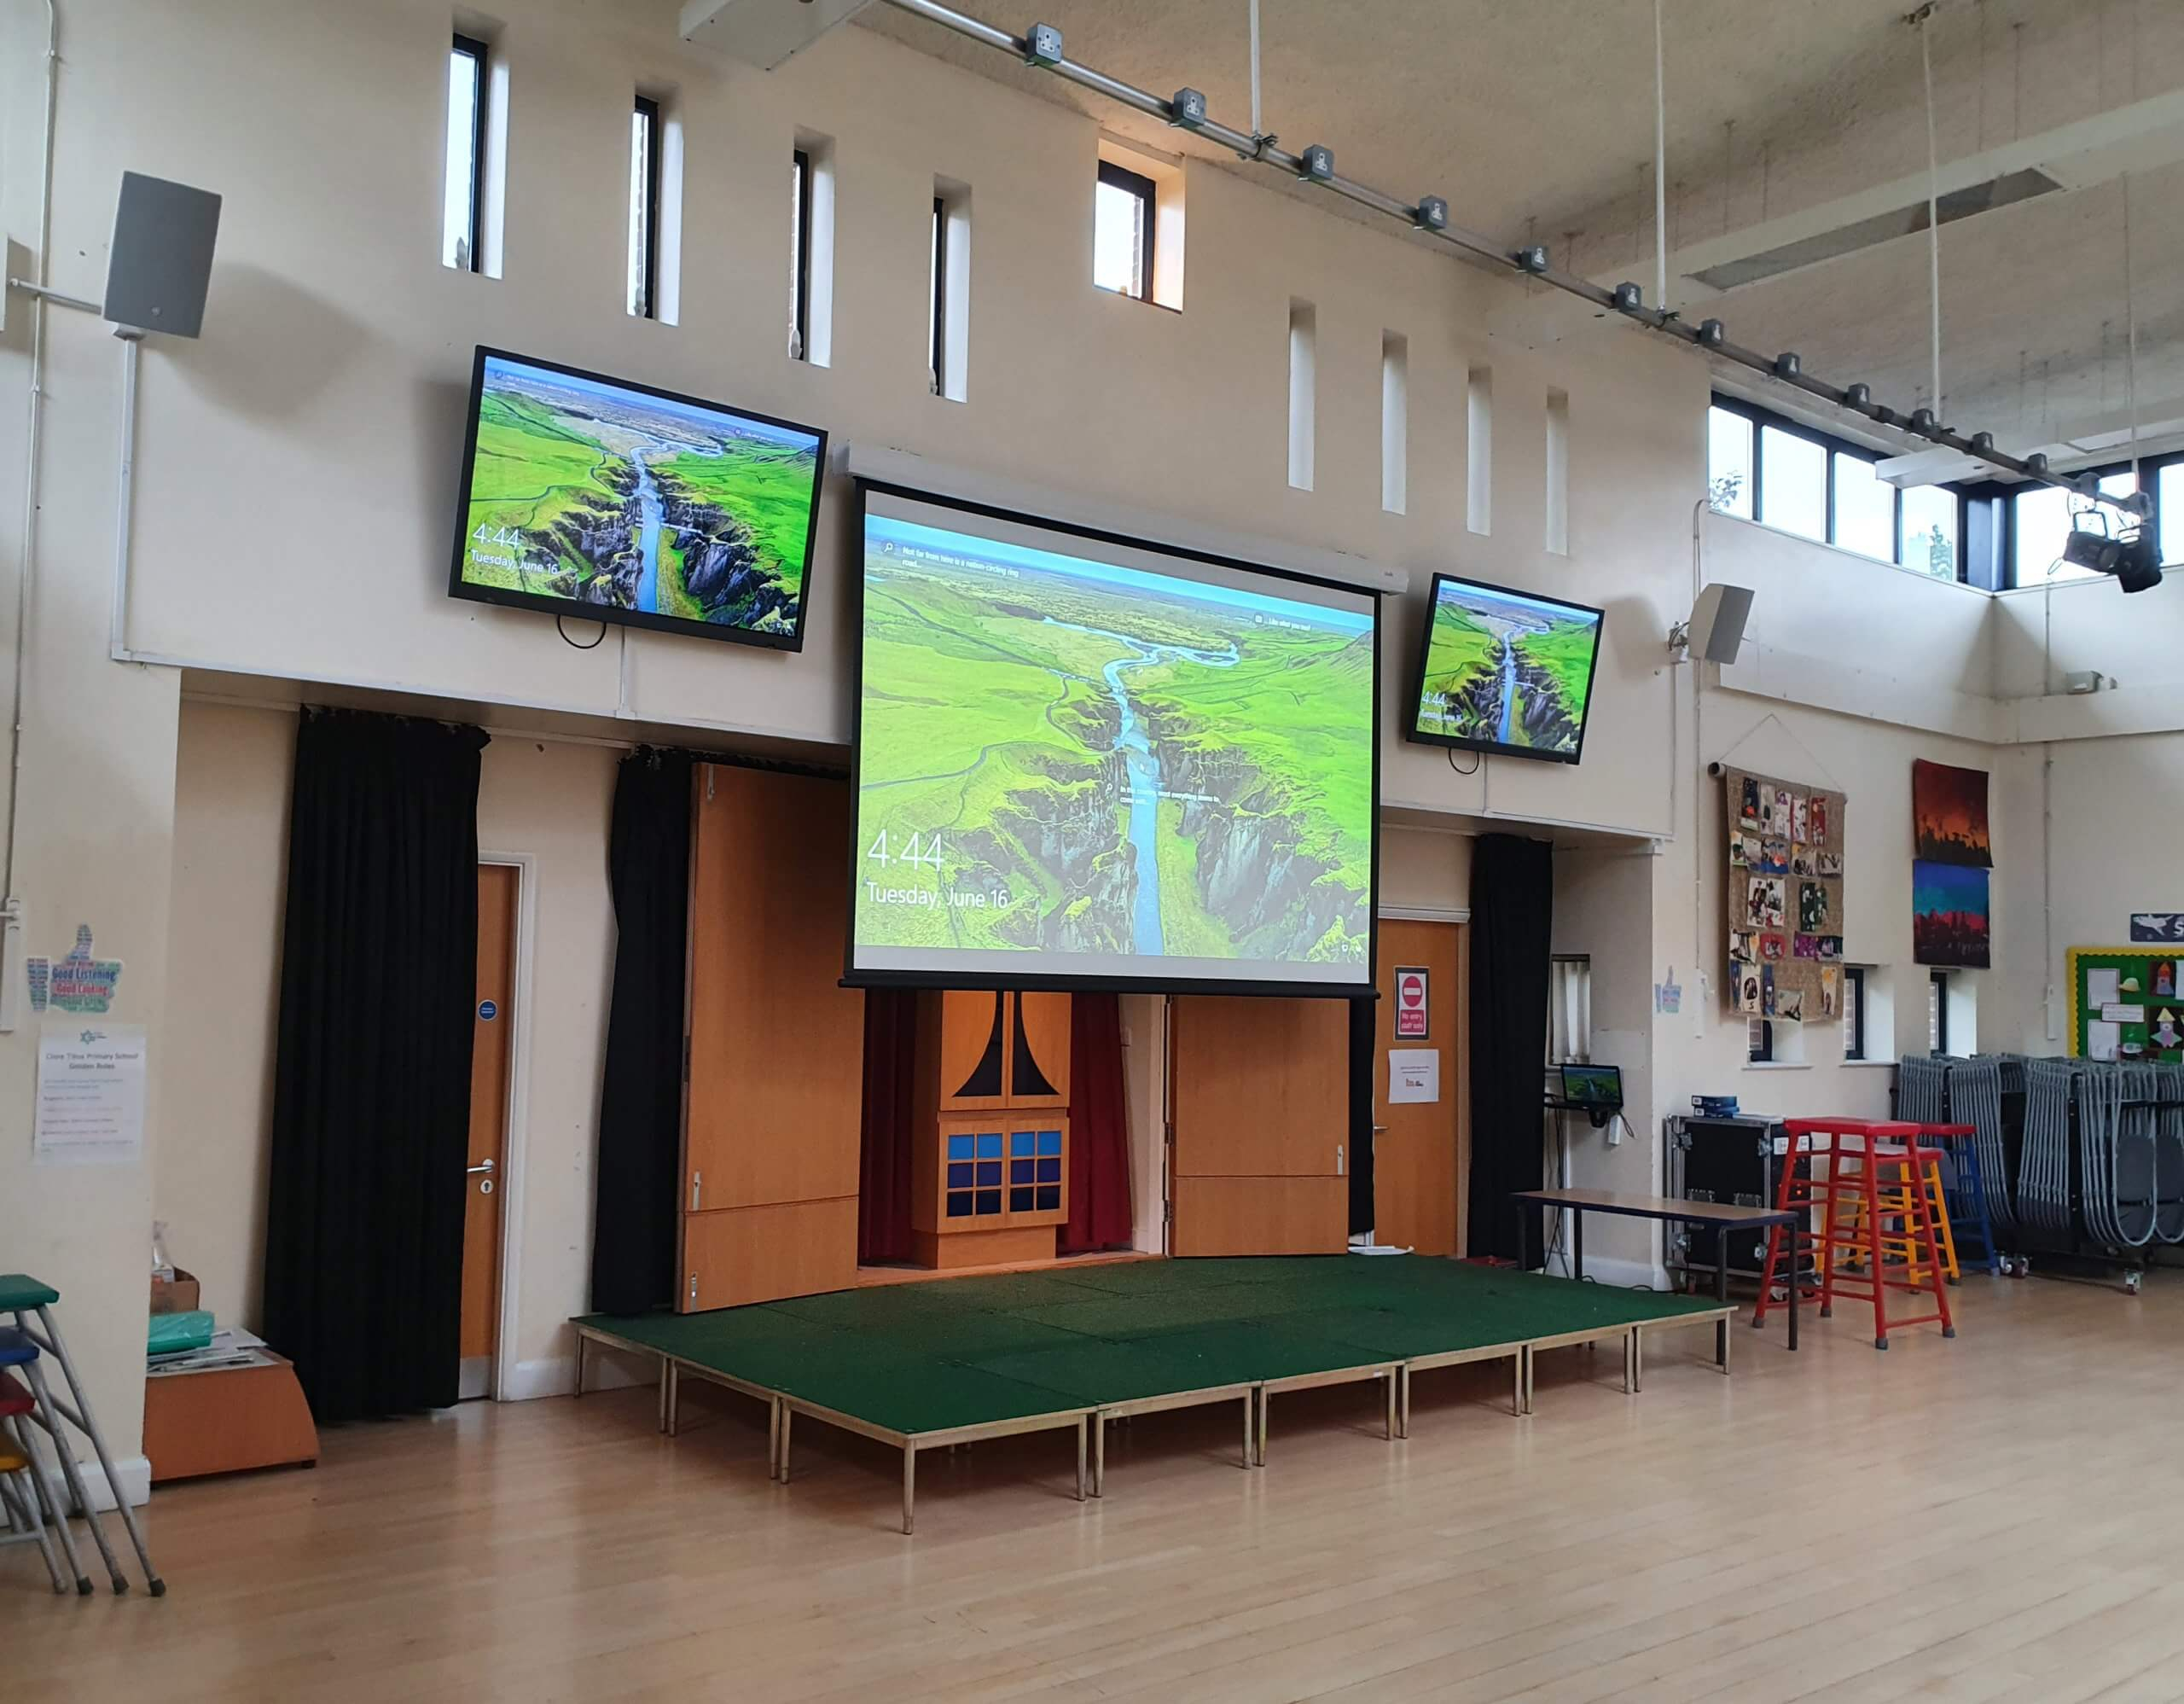 Clarity in Education Audio Visual Projection & Displays